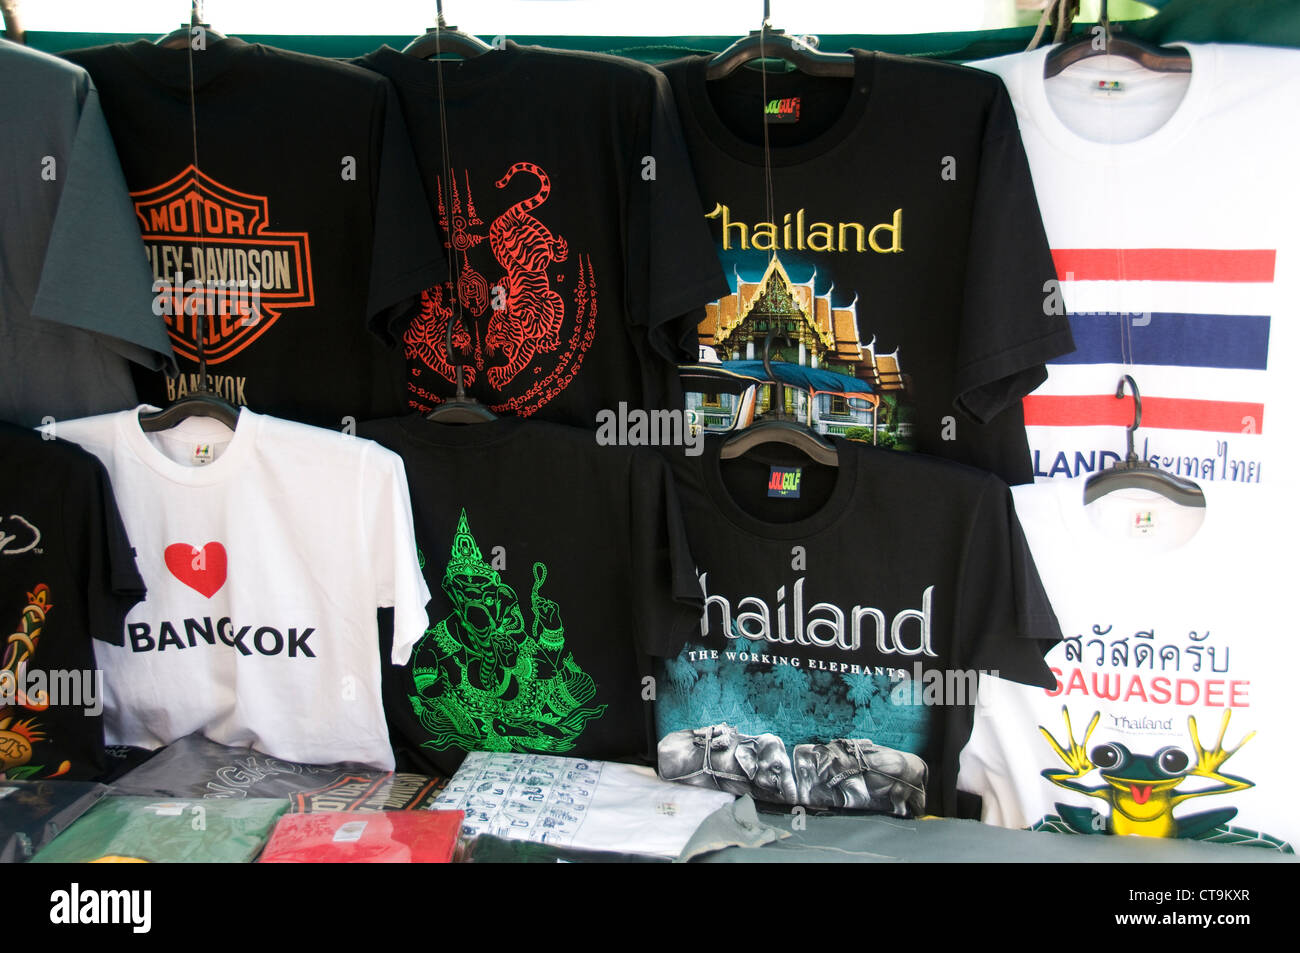 Thailand shirts photography and images Alamy